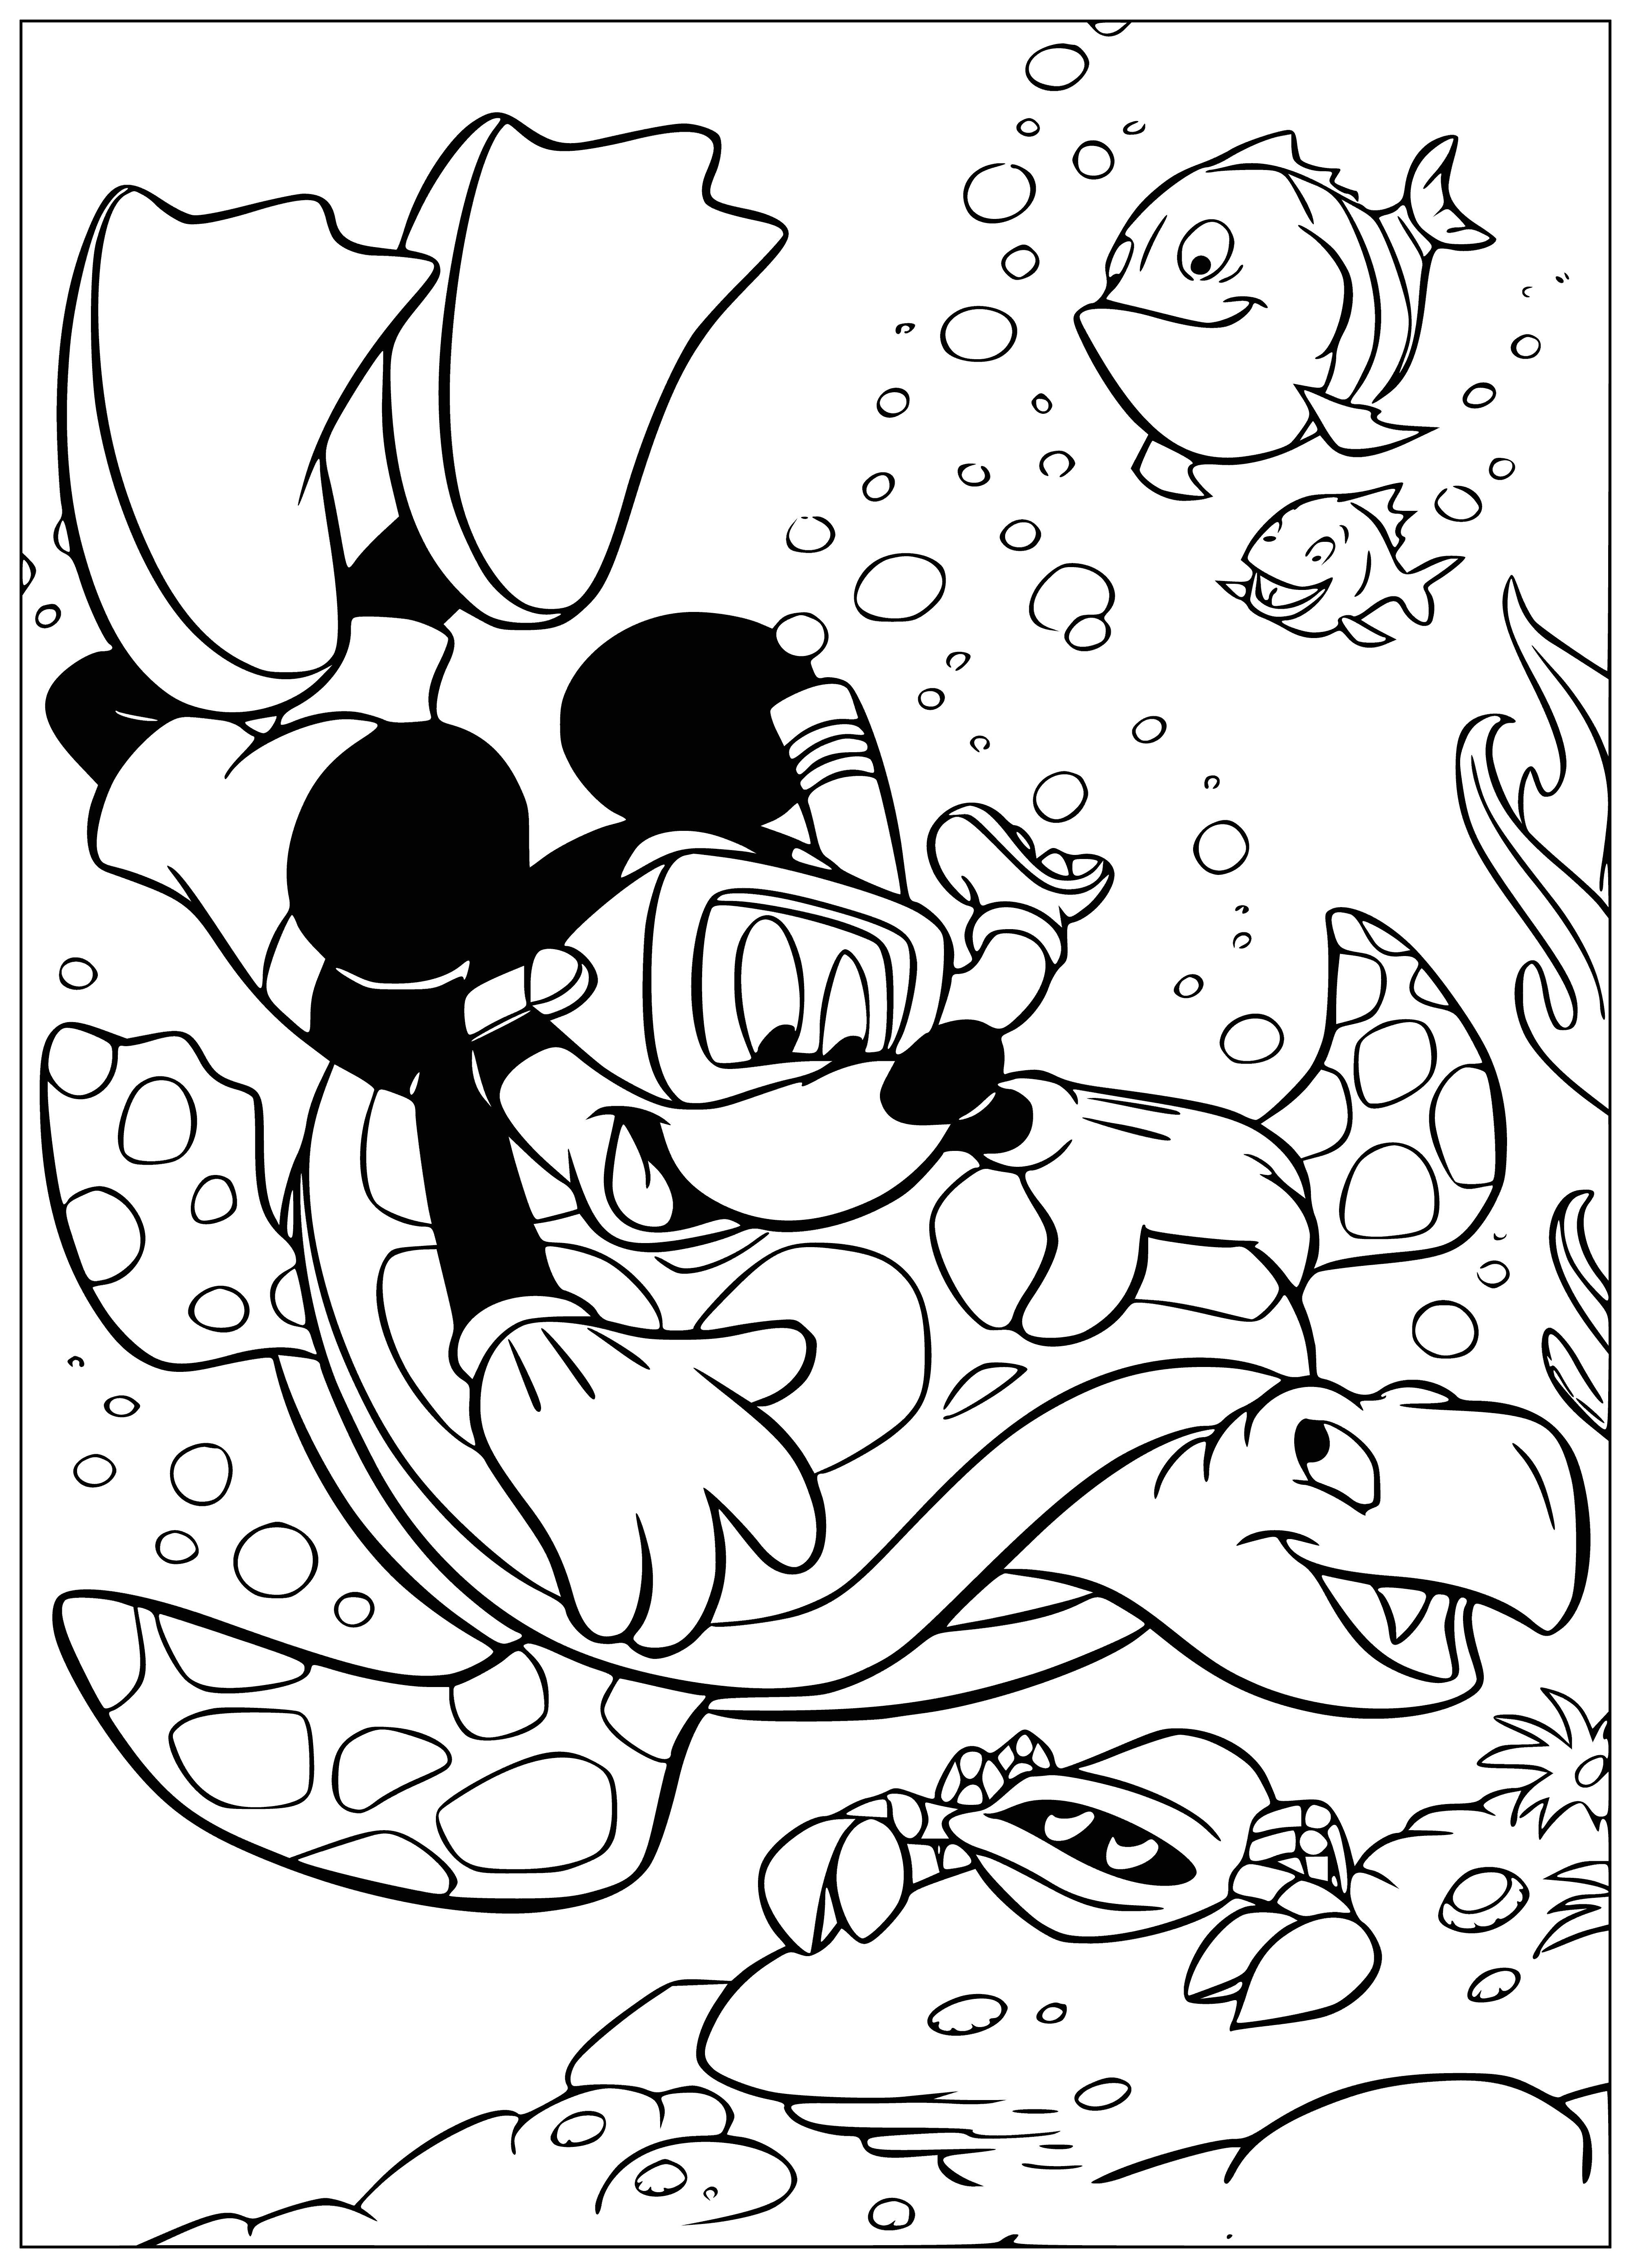 coloring page: Mickey and friends on beach playing with a soft, green turtle with a hard, brown shell swimming in the water.